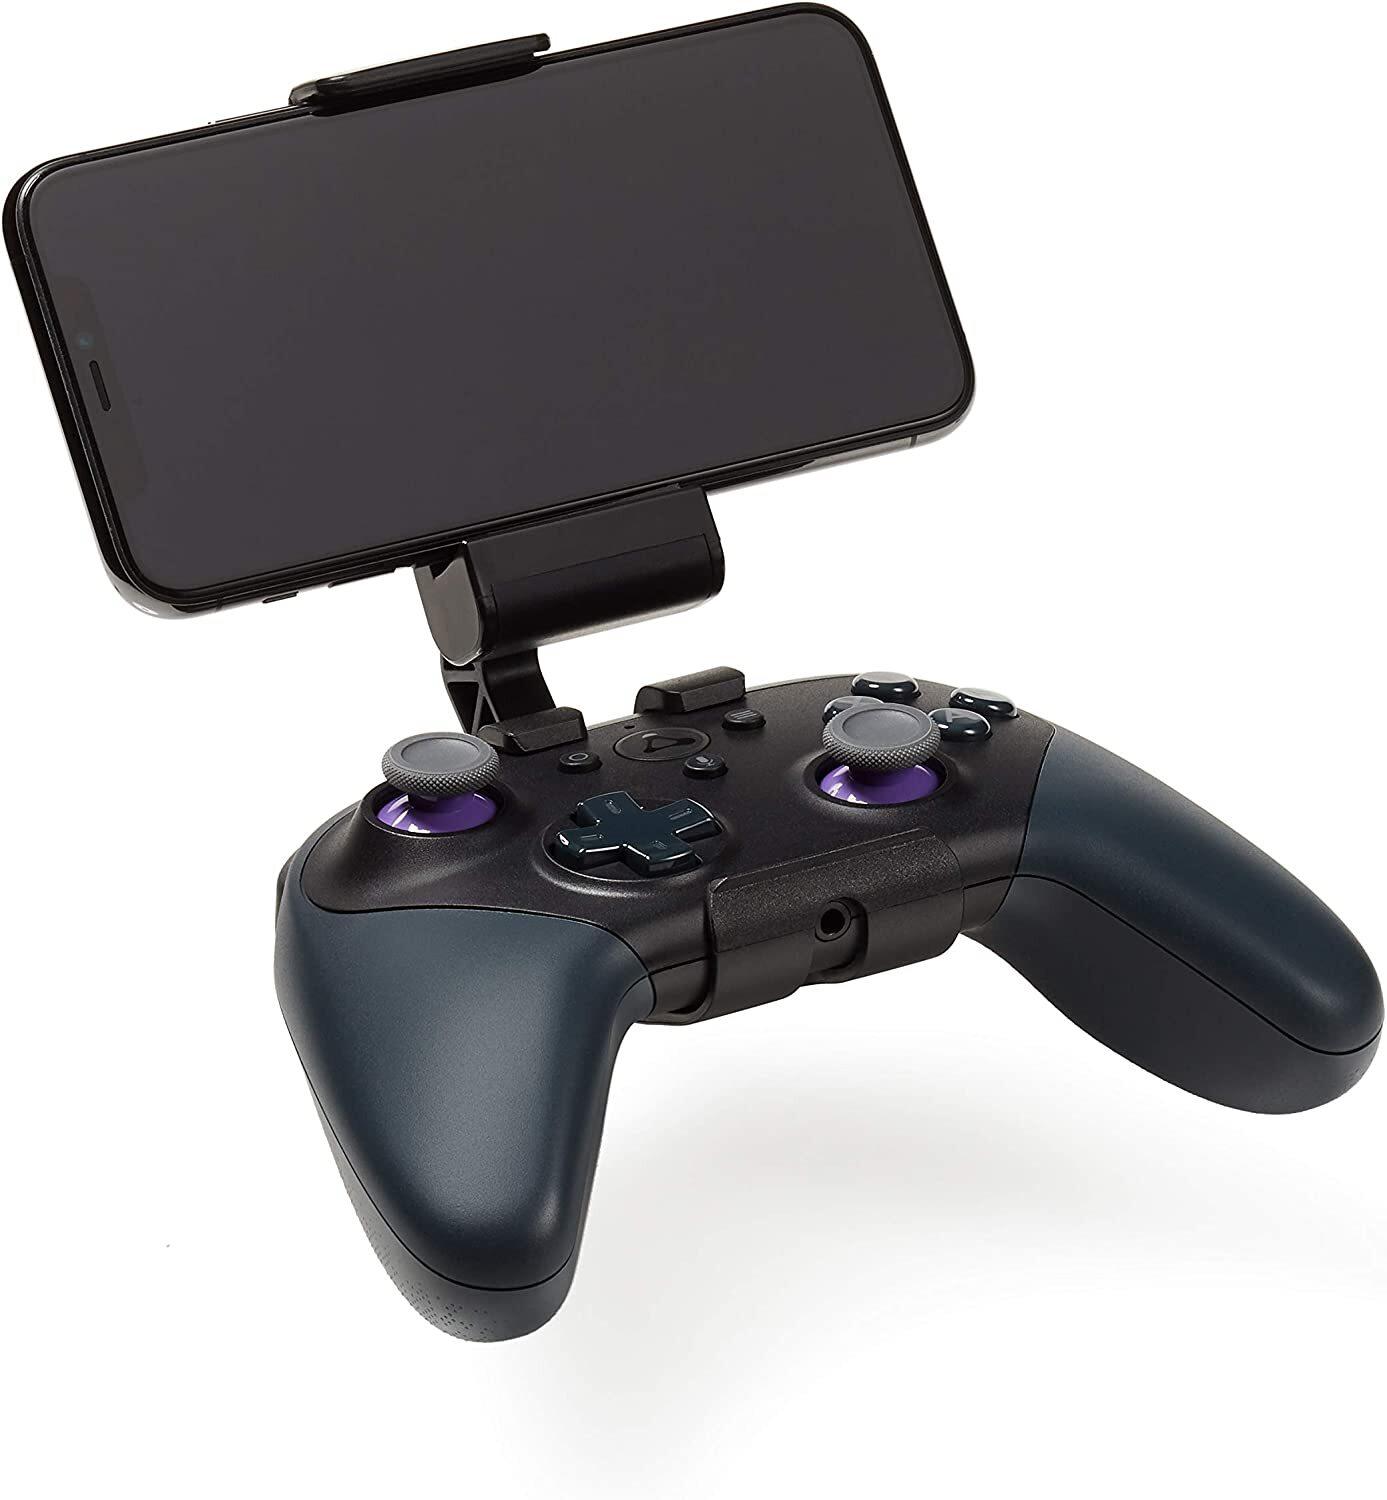 An image of the Luna Controller with Phone Clip Bundle.